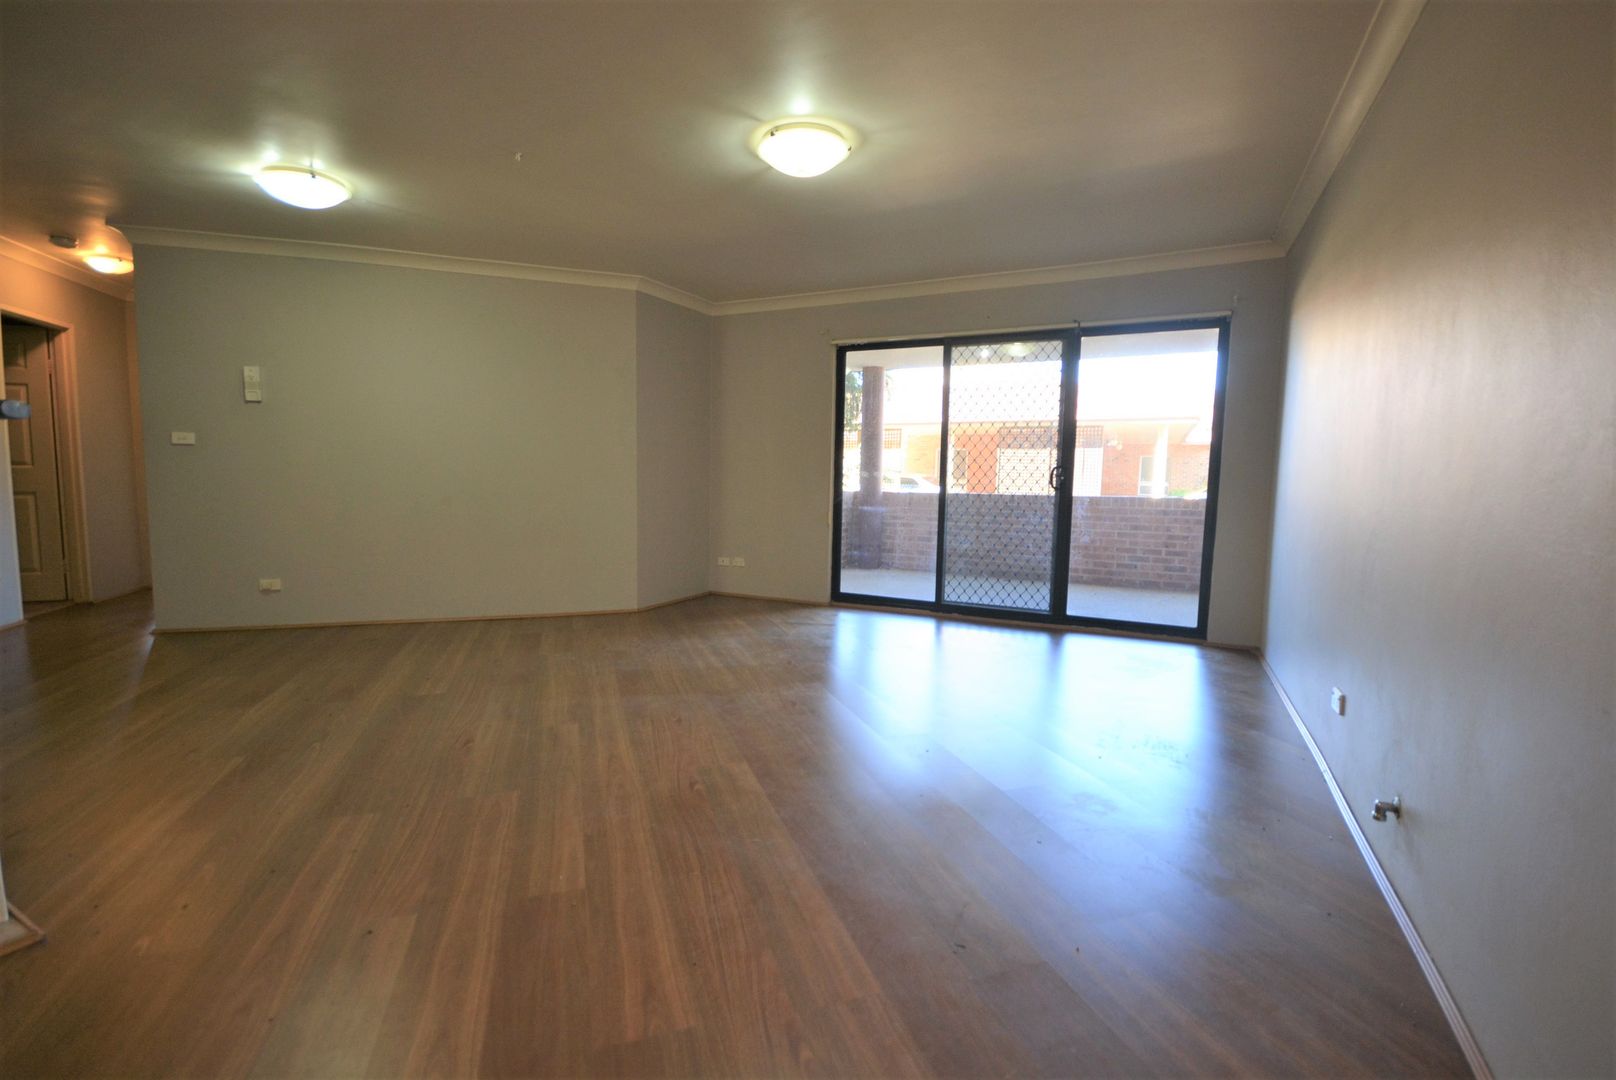 1/11 Chester Hill Road, Chester Hill NSW 2162